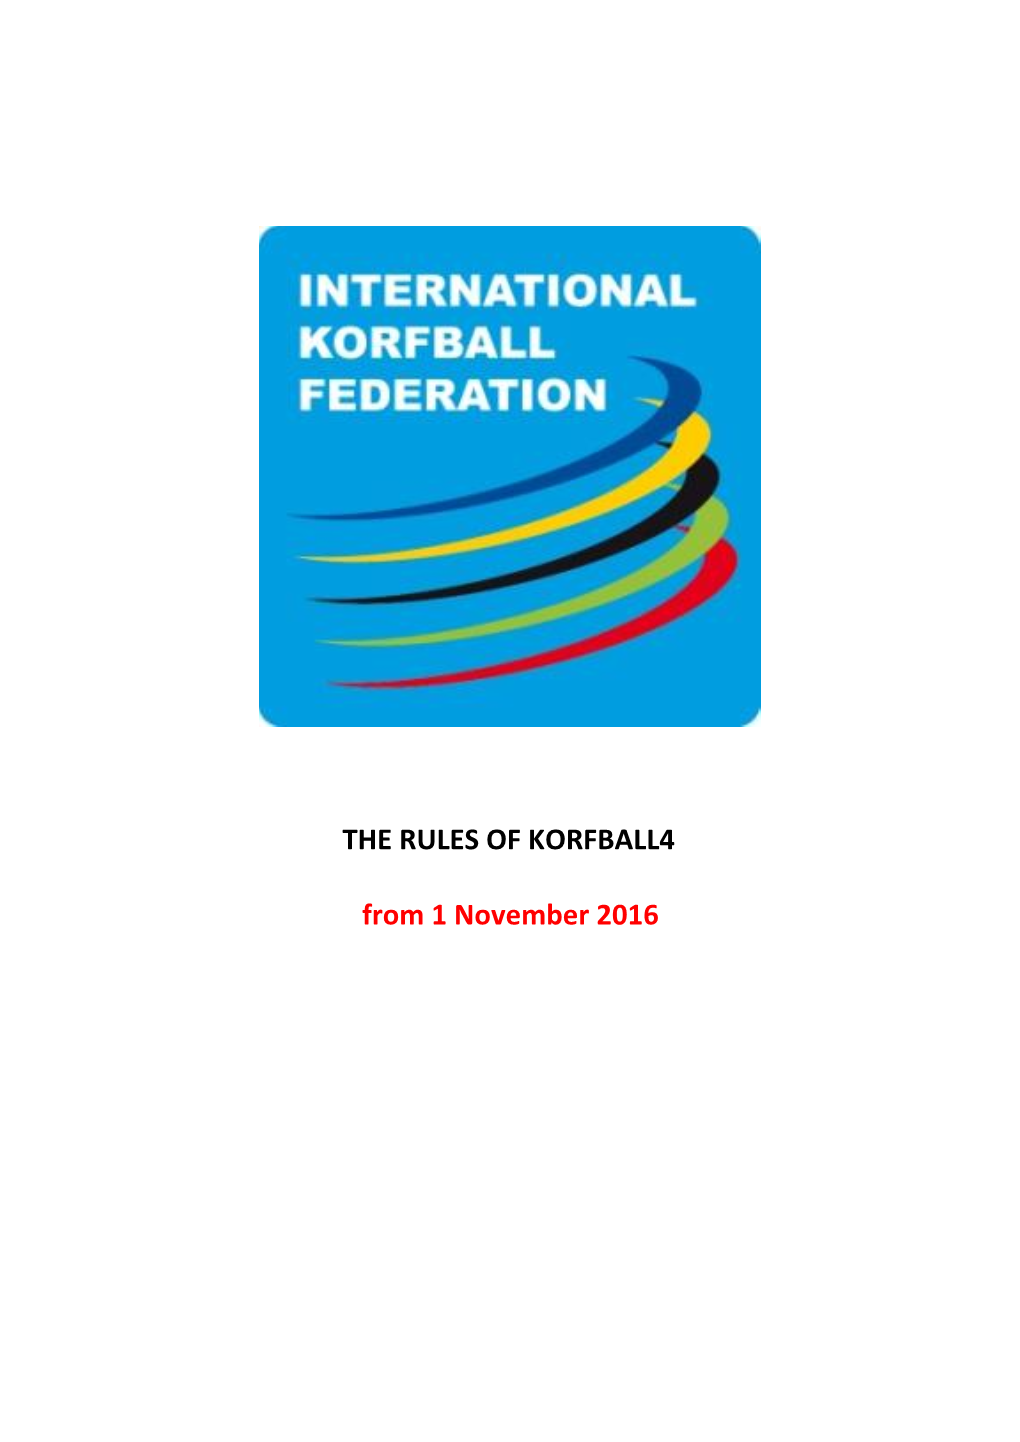 The Rules of Korfball4